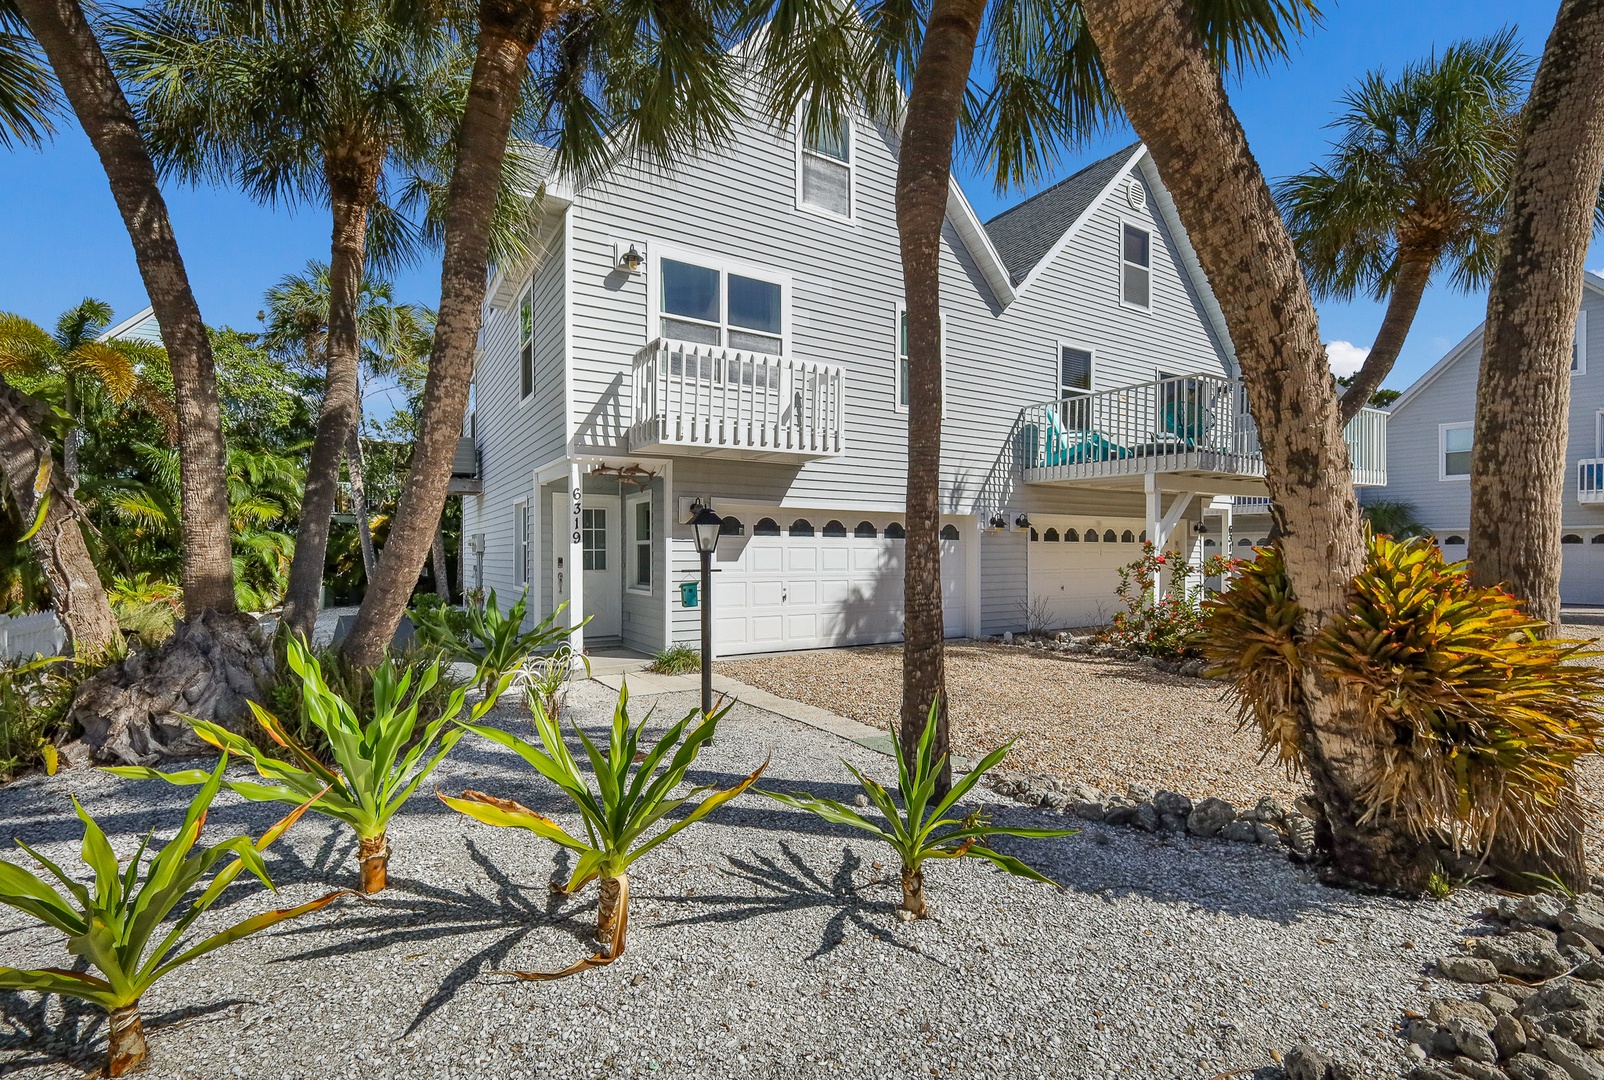 Two Sister's - By Anna Maria Island Accommodations  (2)